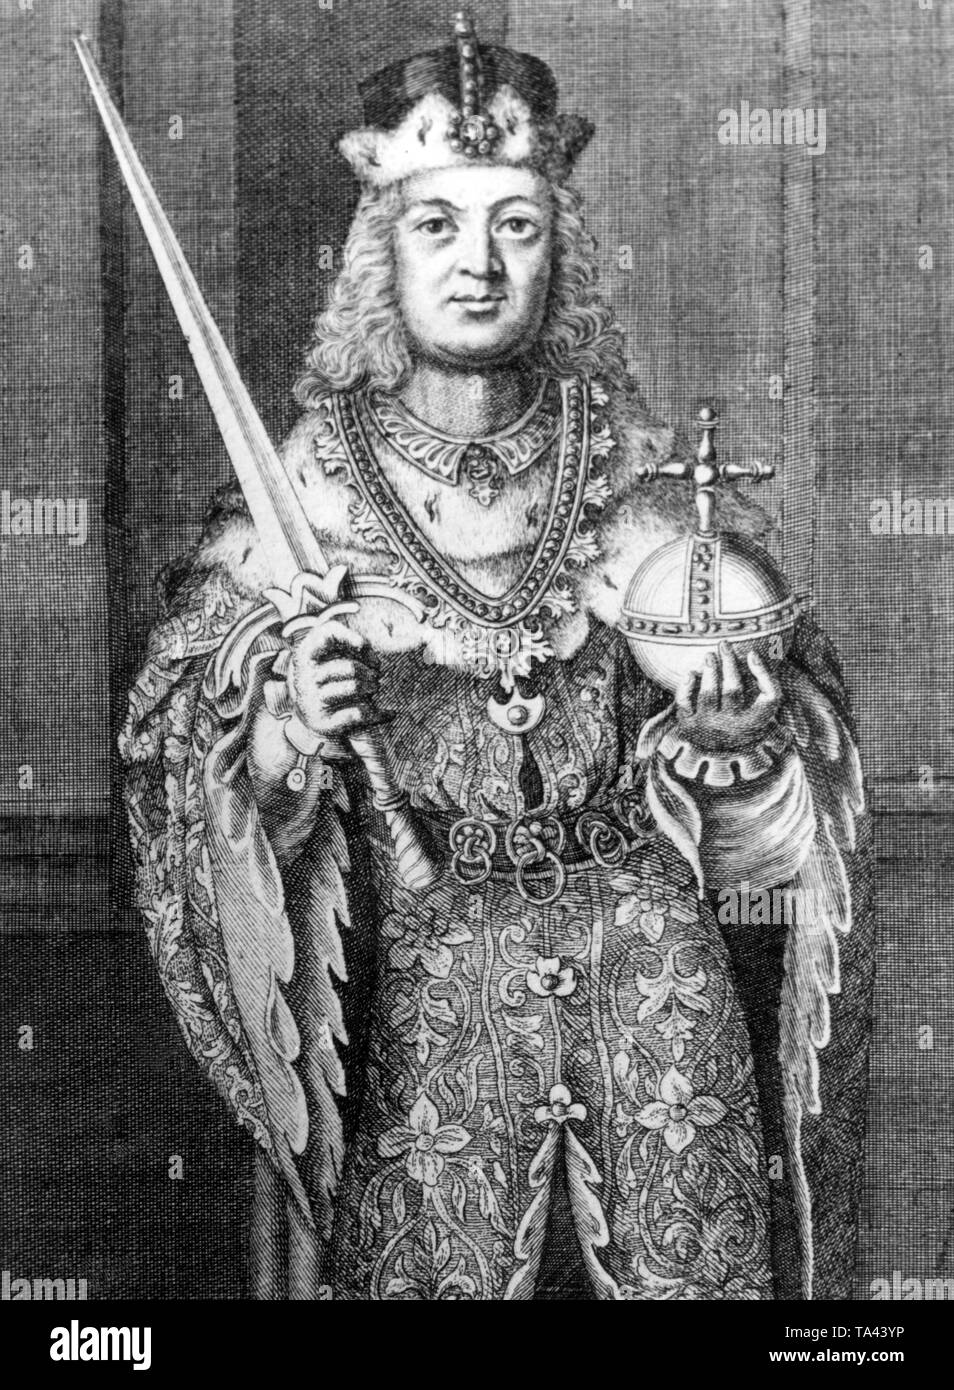 This photograph is a portrait of Ludwig I, nicknamed 'The Kelheimer', Duke of Bavaria, son of Otto I, with the imperial insignia sword, crown and orb with cross. In 1180 Otto von Wittelsbach was rewarded with the Duchy of Bavaria for the military assistance offered to Emperor Friedrich Barbarossa in place of the outlawed Henry the Lion. Ludwig the Kelheimer acquired large areas and became thereby one of the most famous member of the House of Wittelsbach. Undated picture, probably from the early 13th century Stock Photo